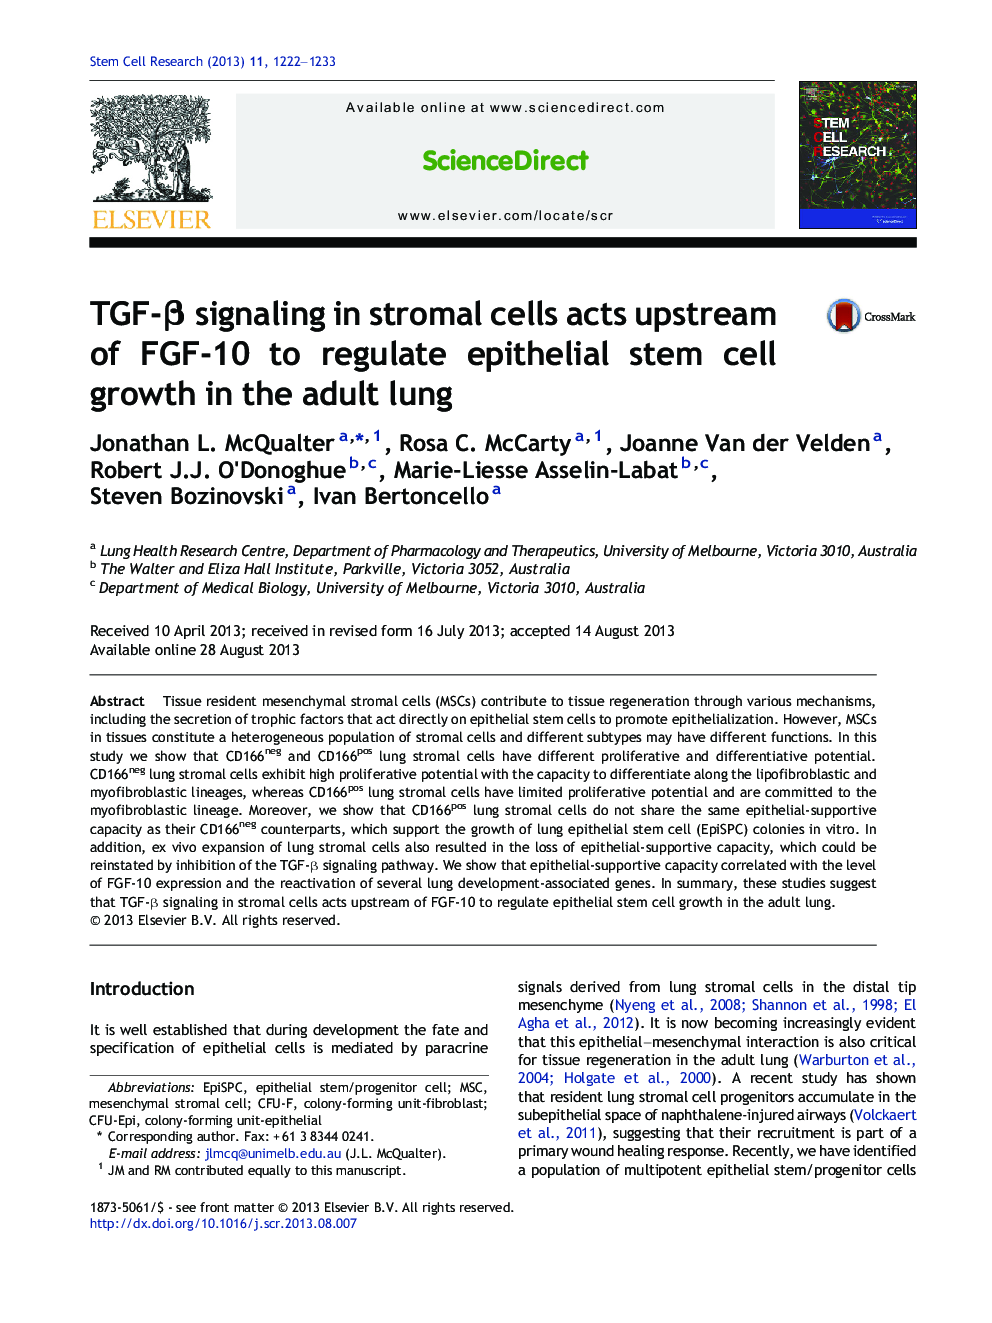 TGF-Î² signaling in stromal cells acts upstream of FGF-10 to regulate epithelial stem cell growth in the adult lung